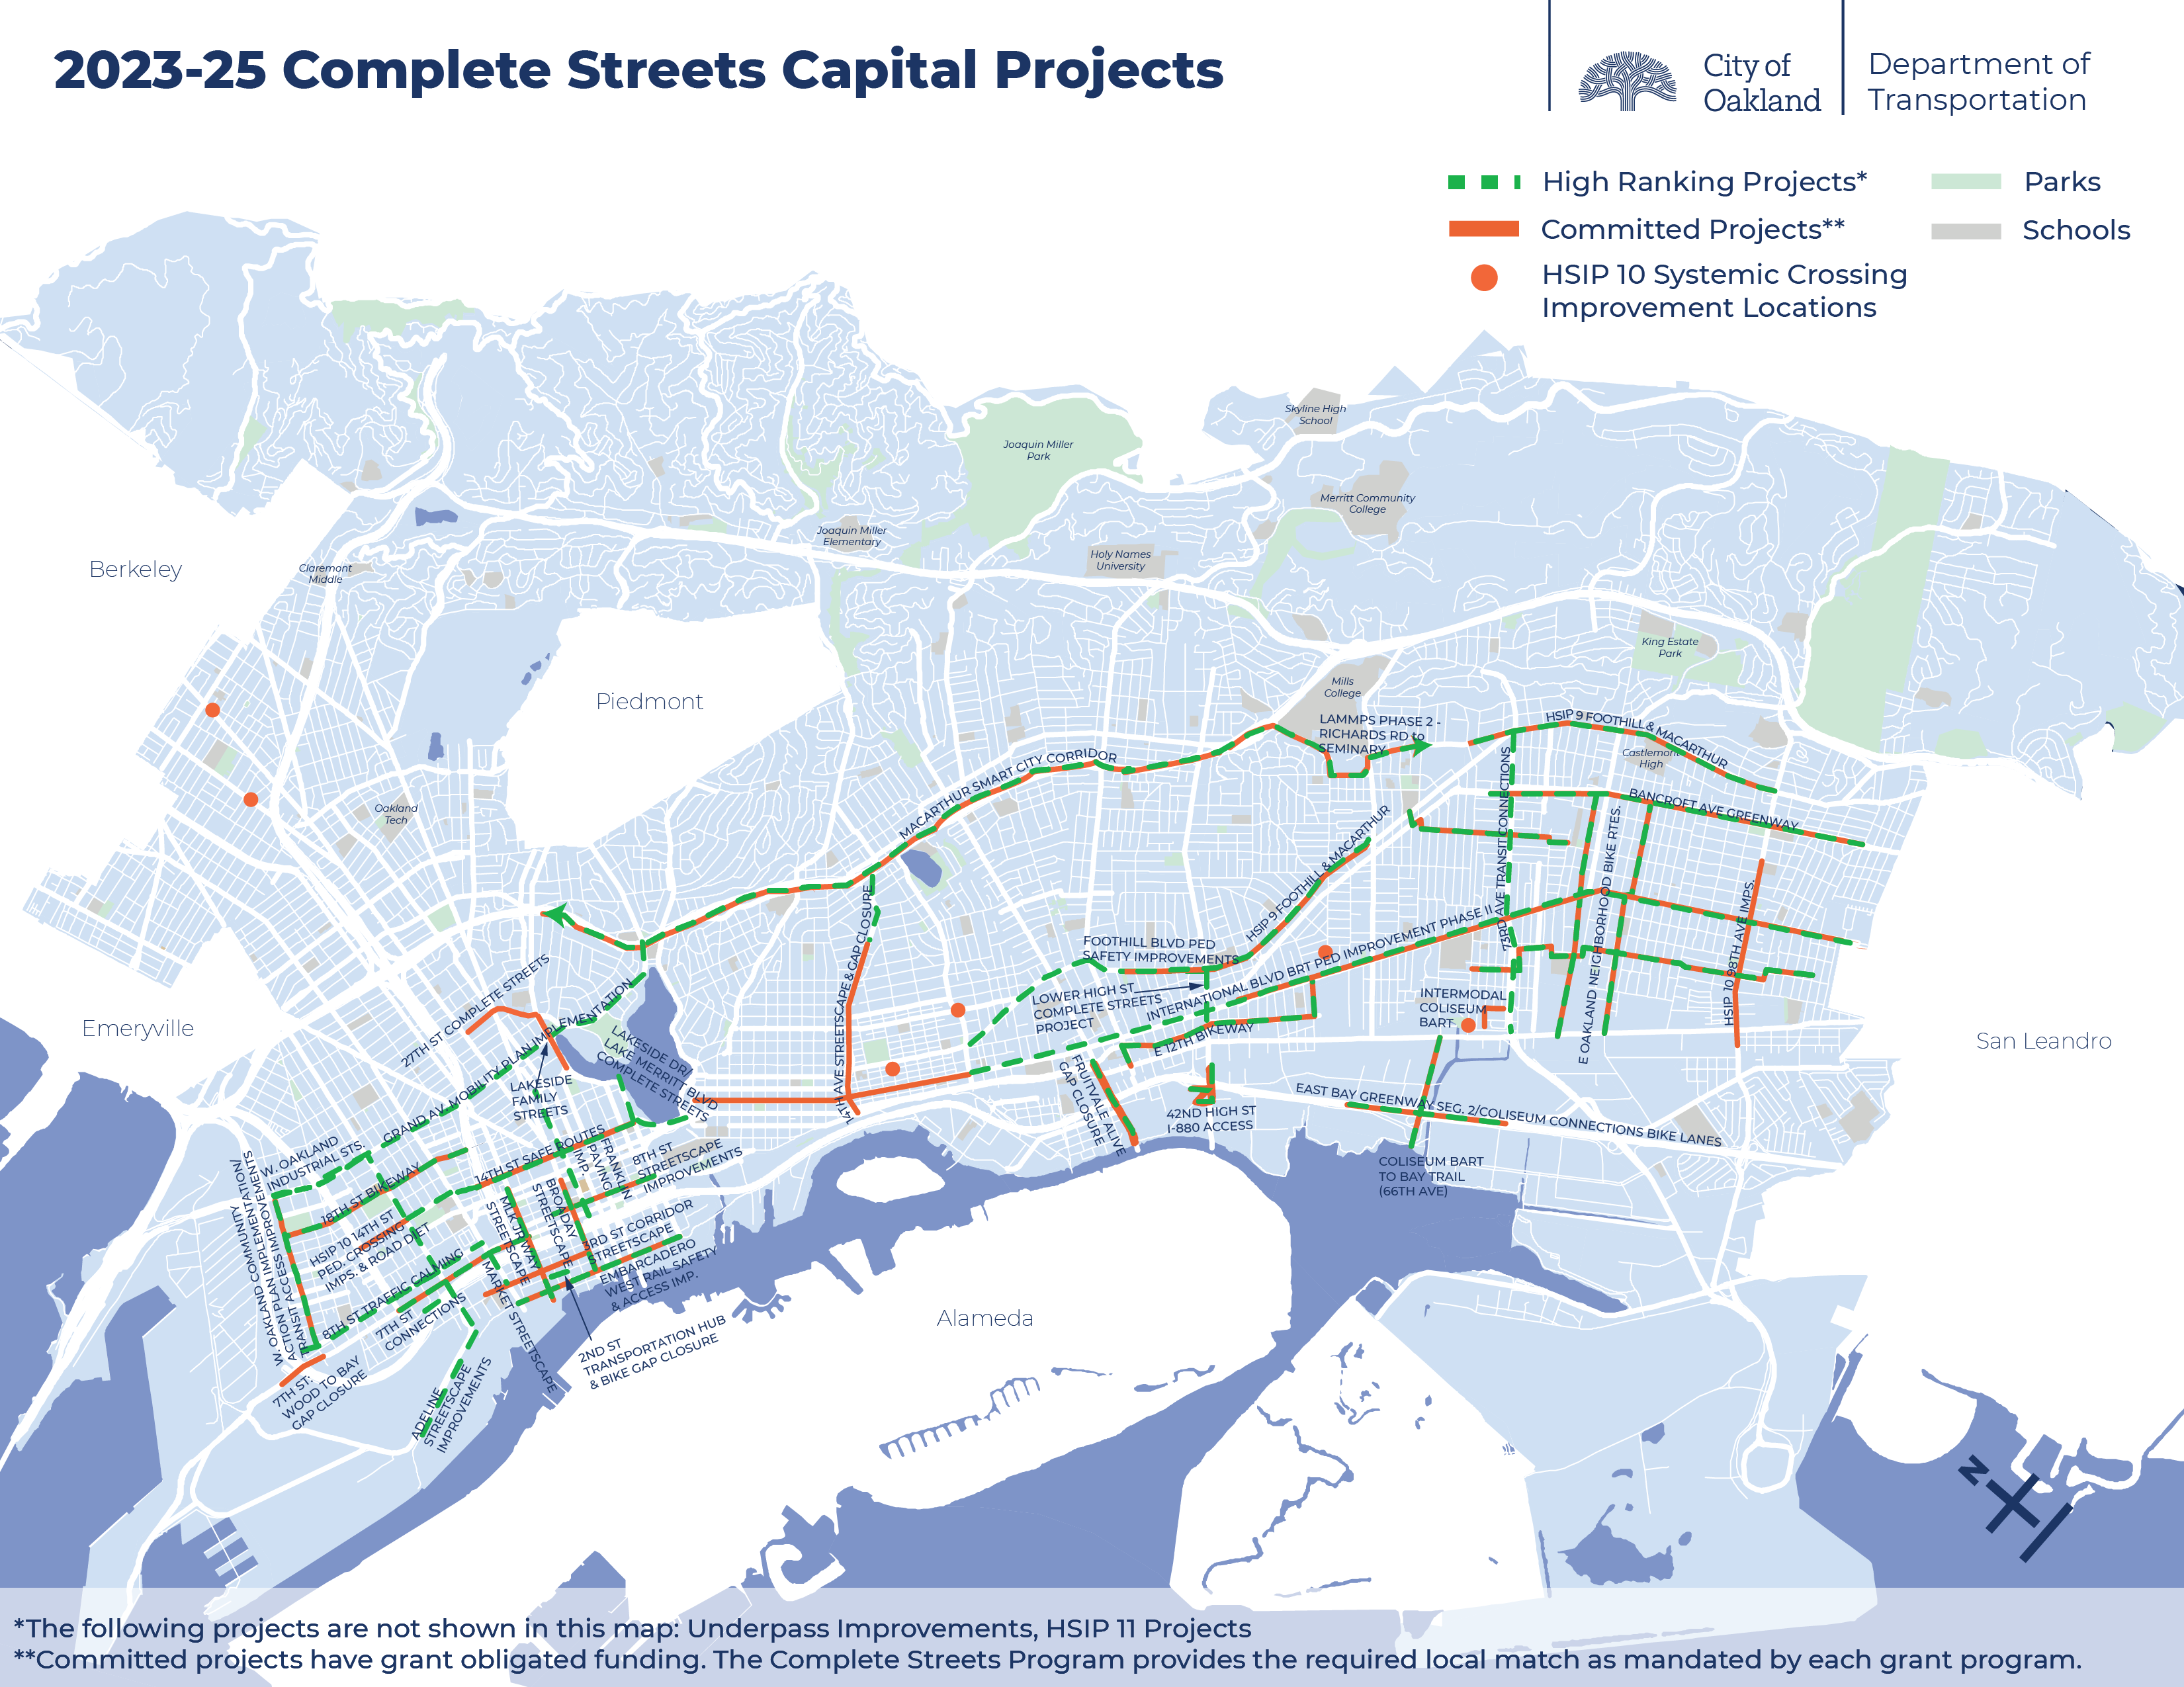 FY 2023-25 Complete Streets Capital Projects: Not all projects funded with Measure KK